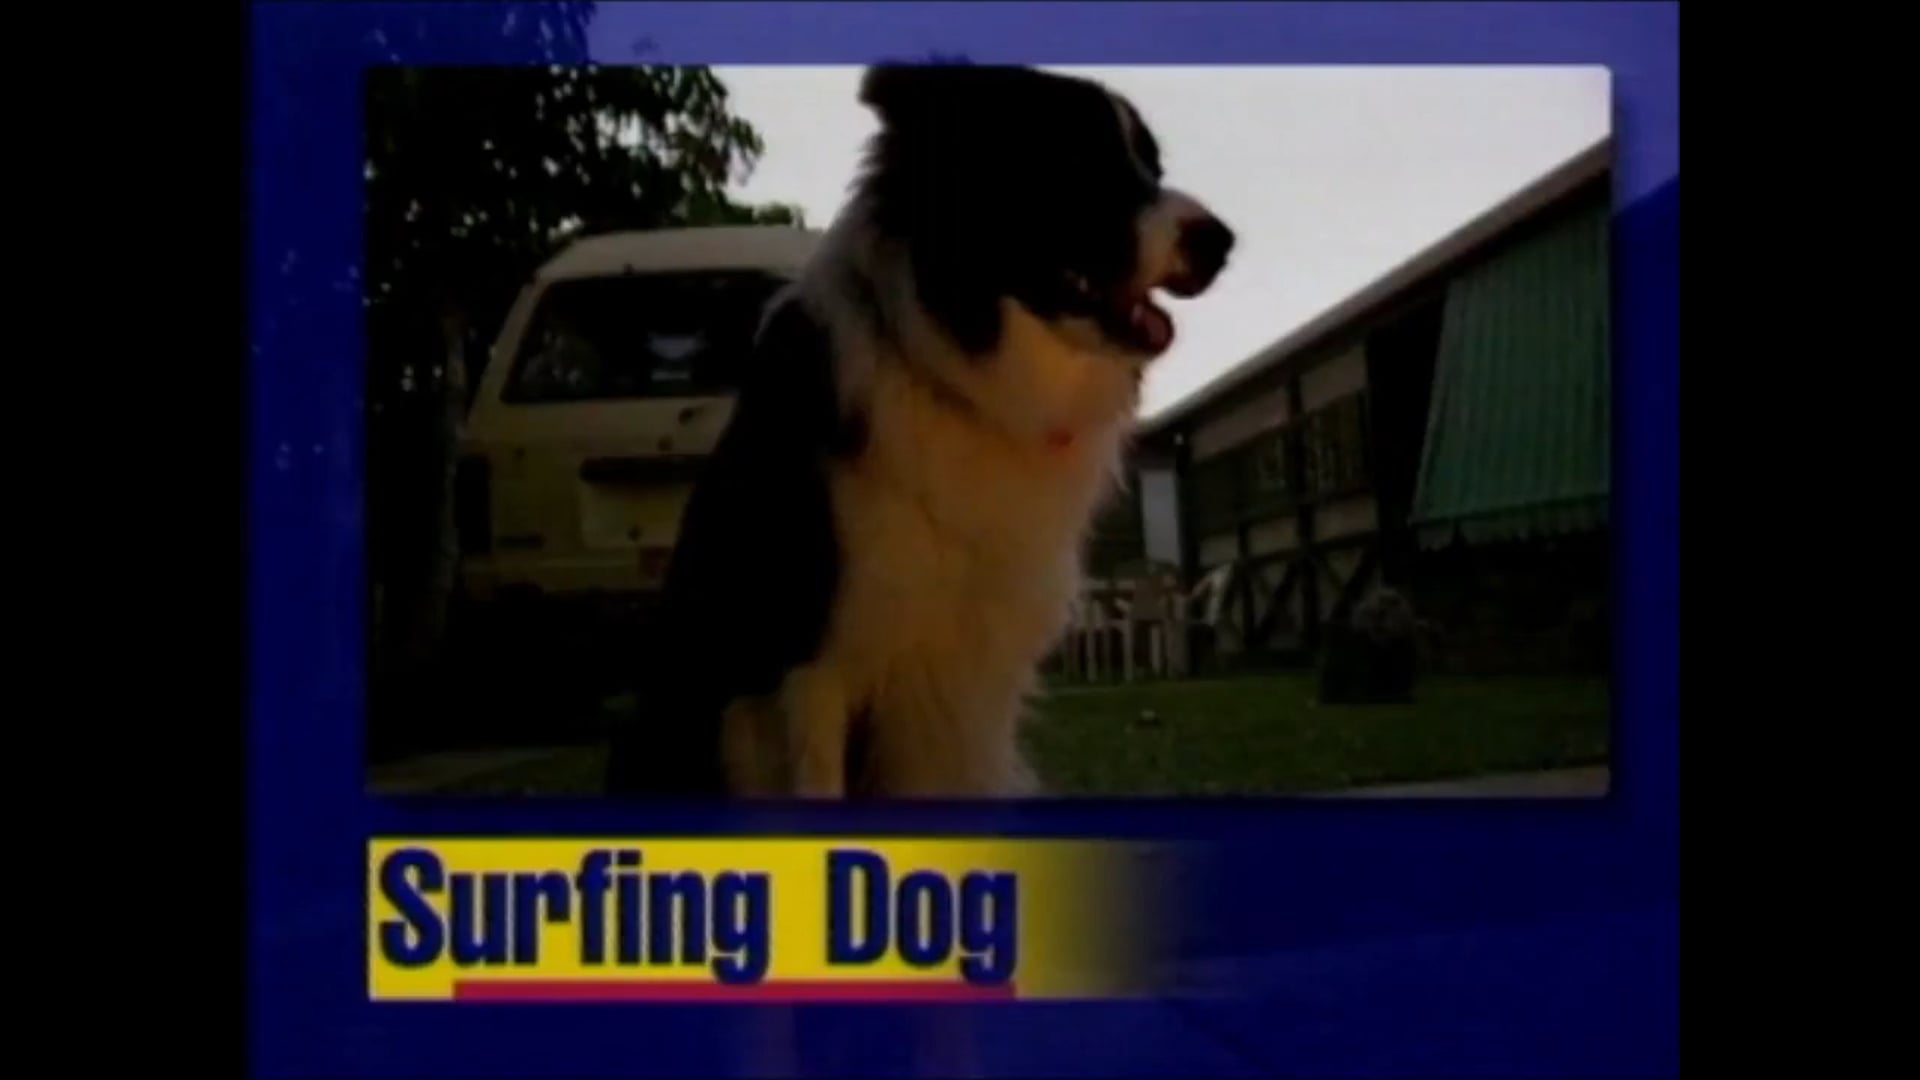 Max the Surfing Dog – 1996